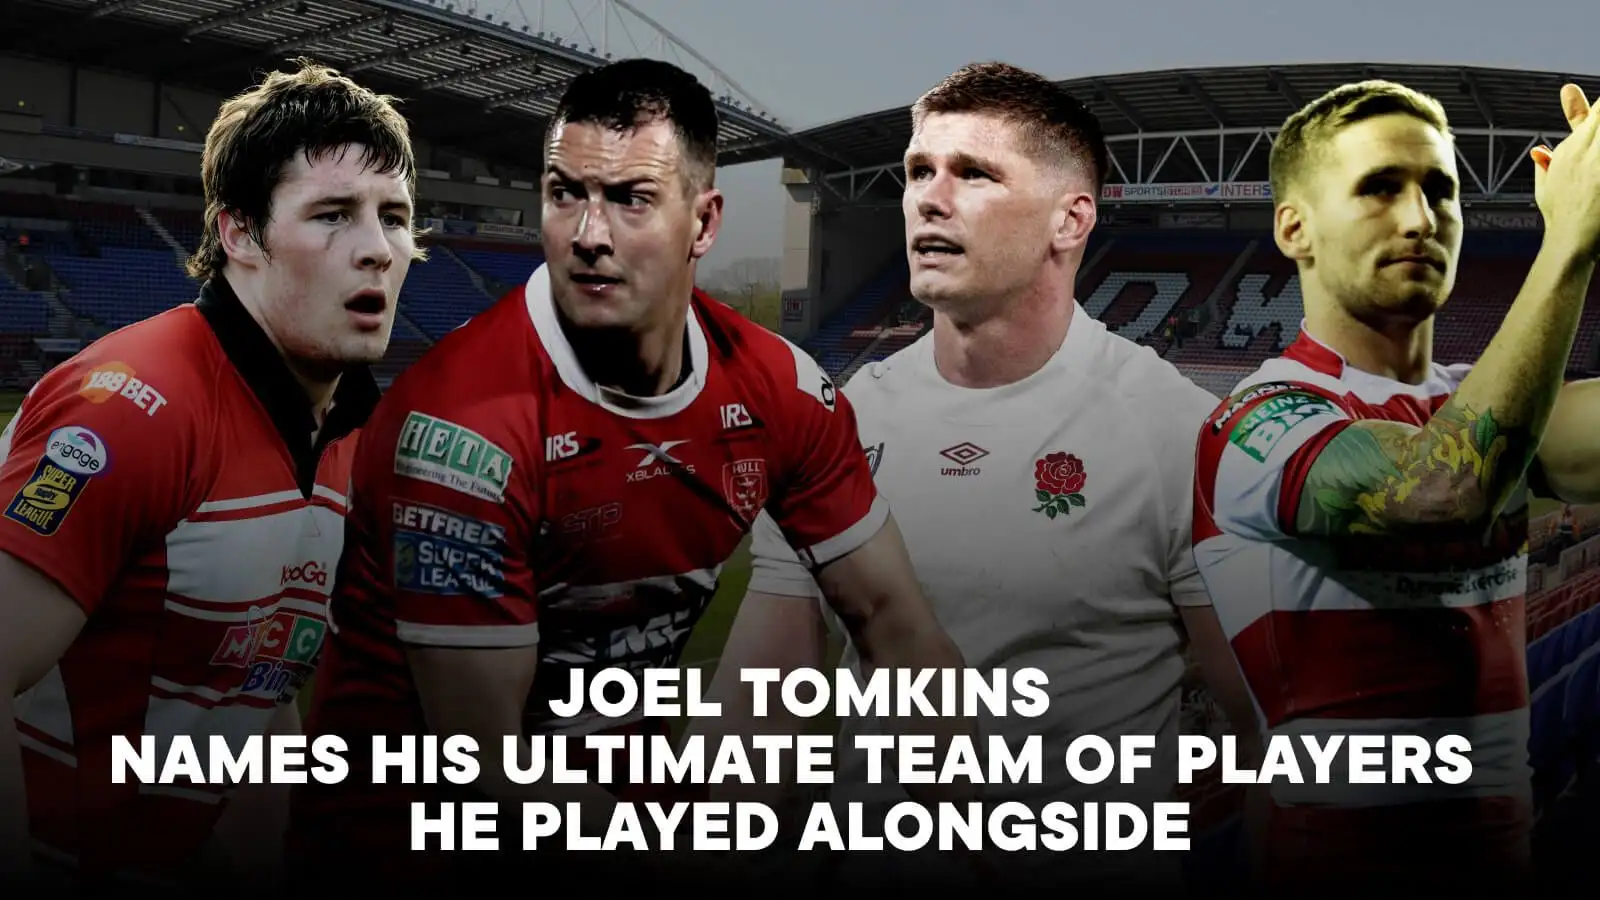 My Ultimate Team: Joel Tomkins names his greatest 1-17 from players he played alongside